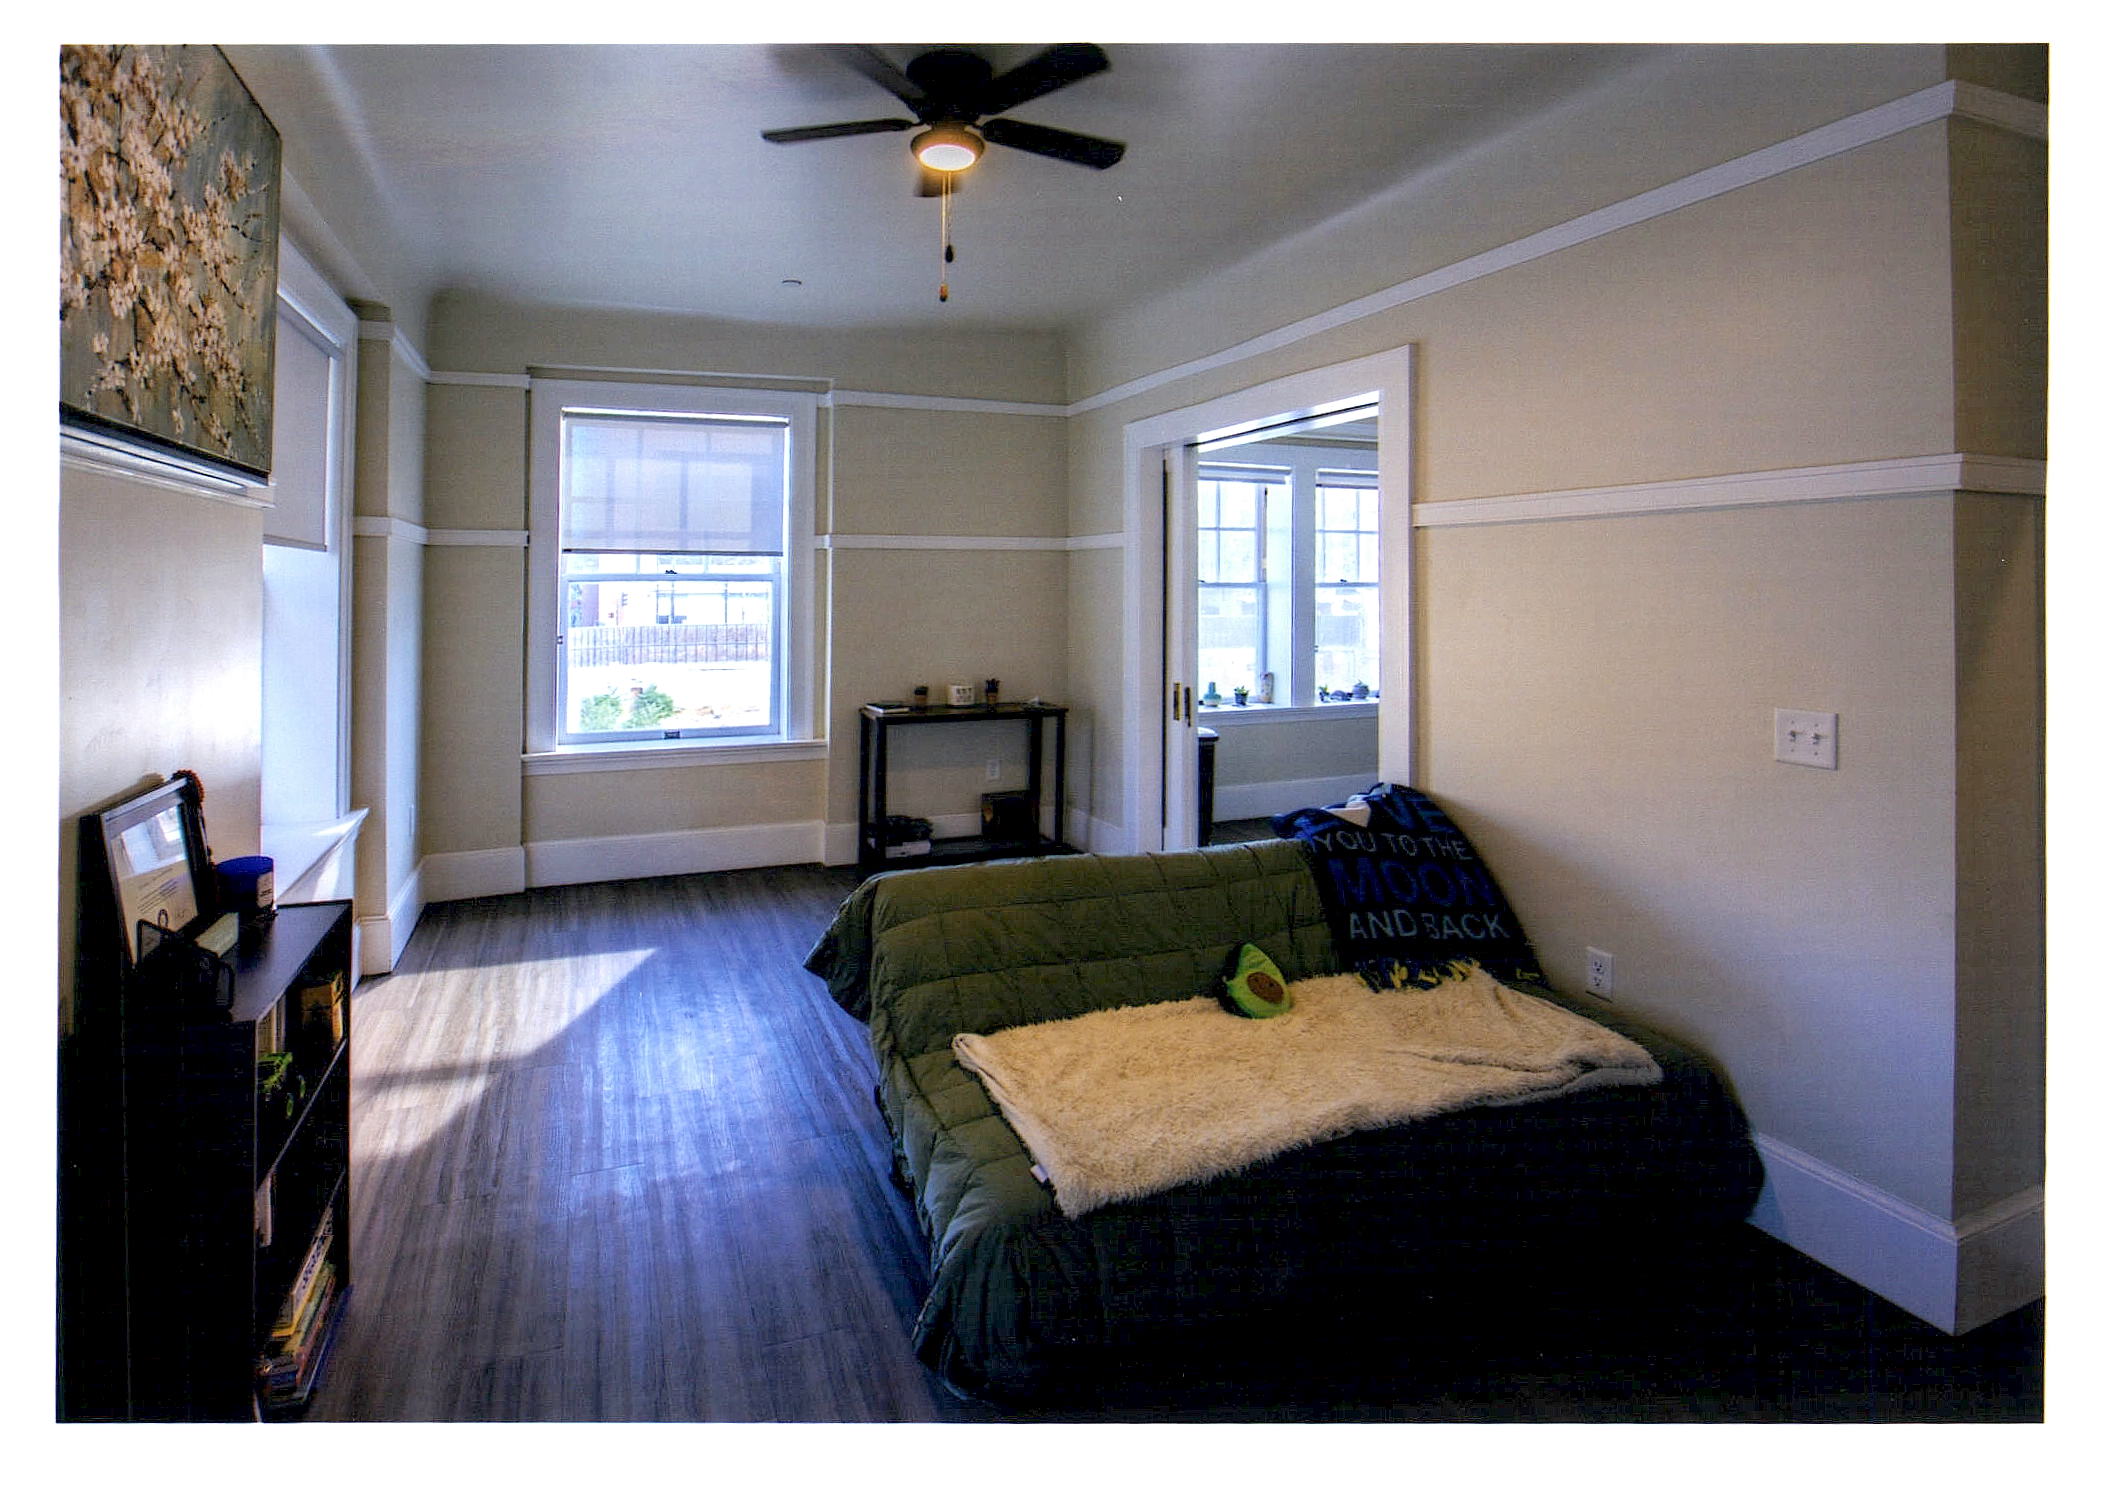 After: view of bedroom area looking towards windows. Living area beyond paired sliding doors is to the right.